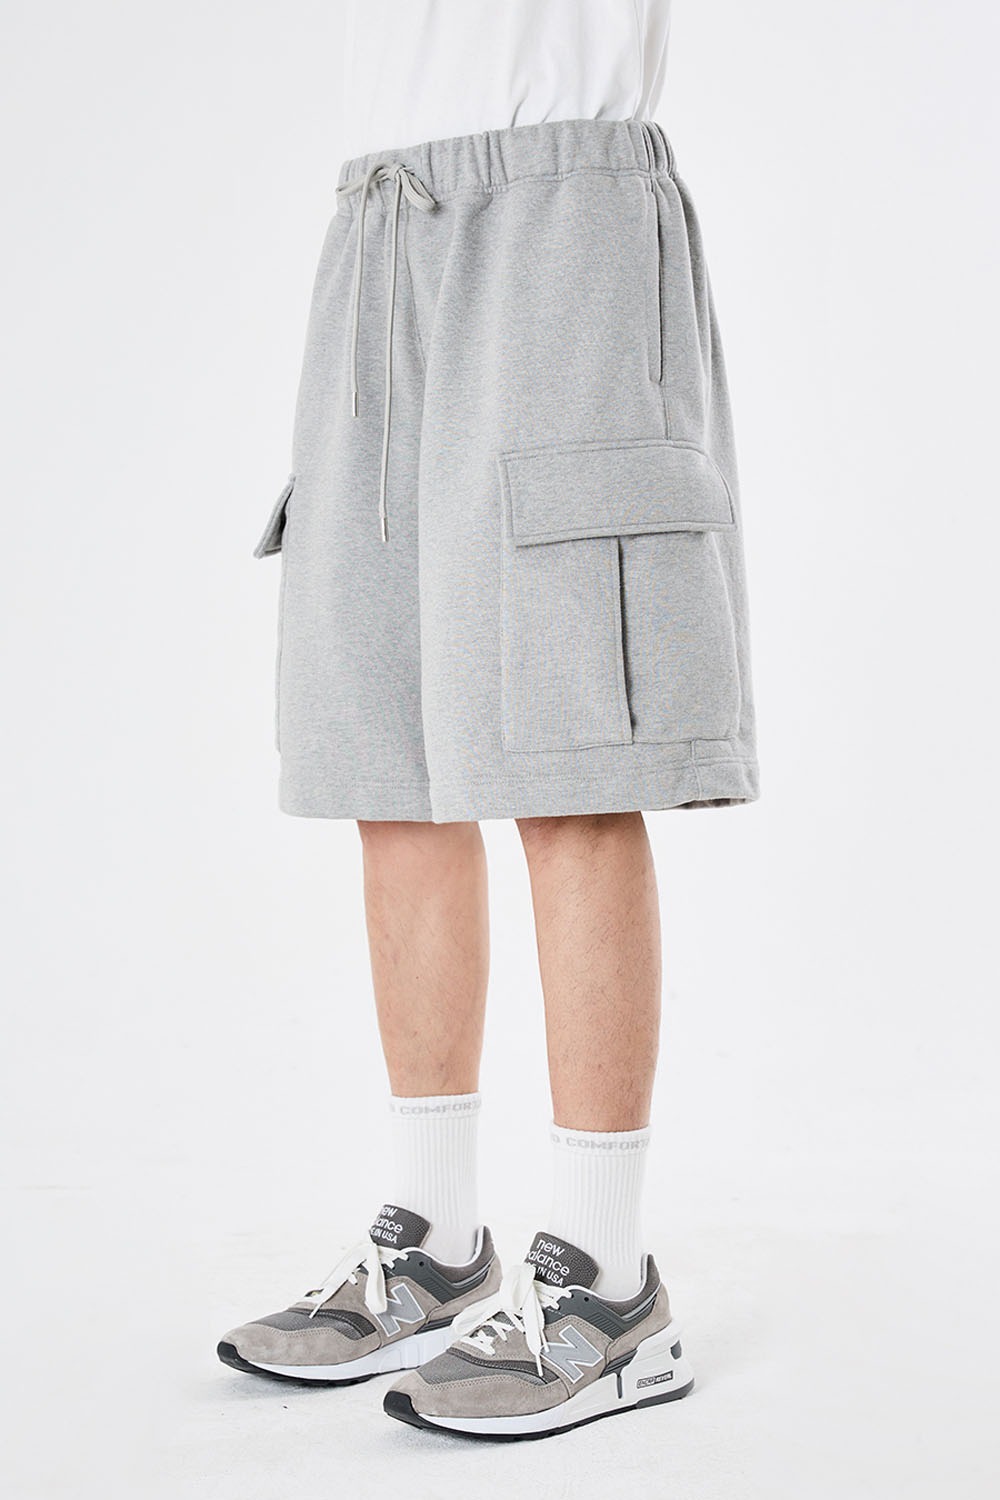 Over Mil Sweat Shorts-Heather Gray